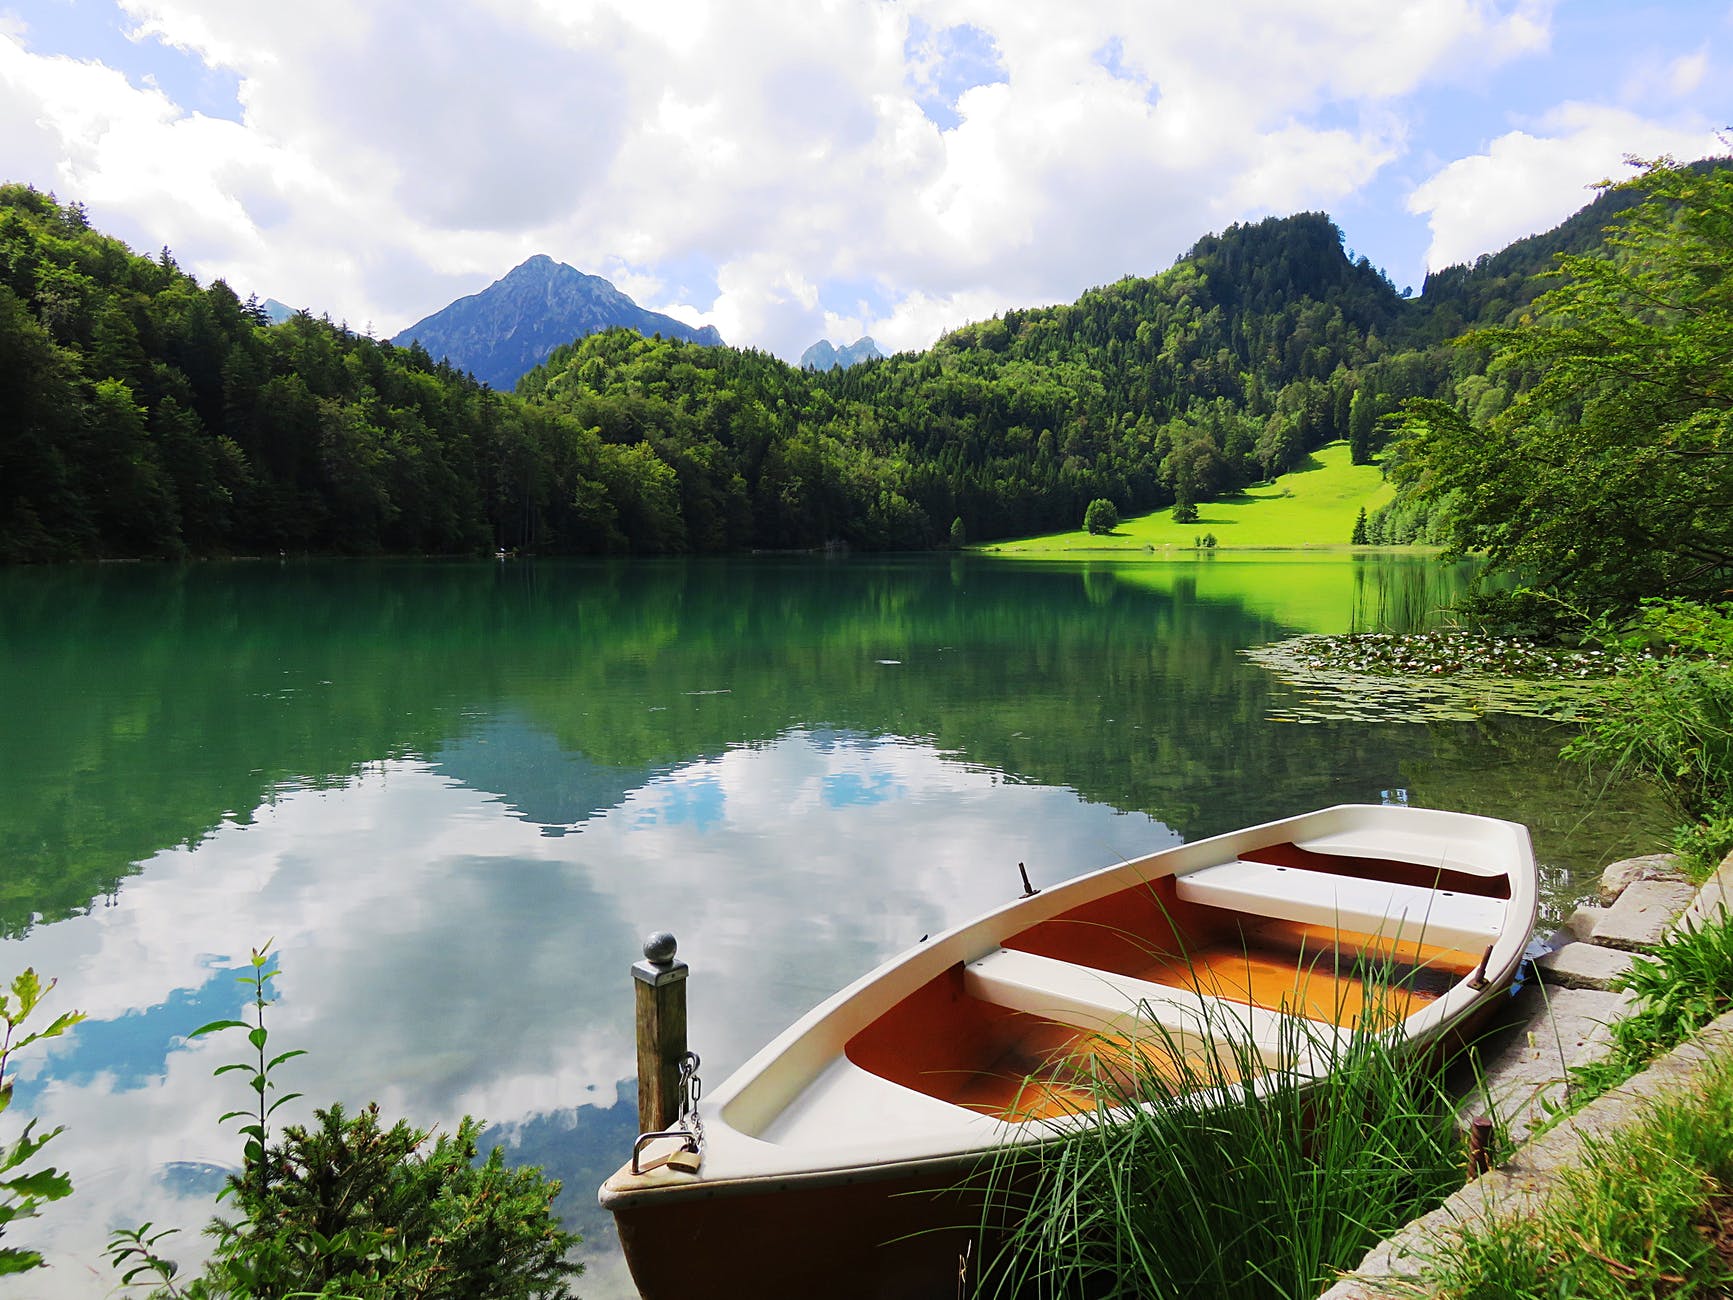 A rowing boat on a placid lake surrounded by mountains